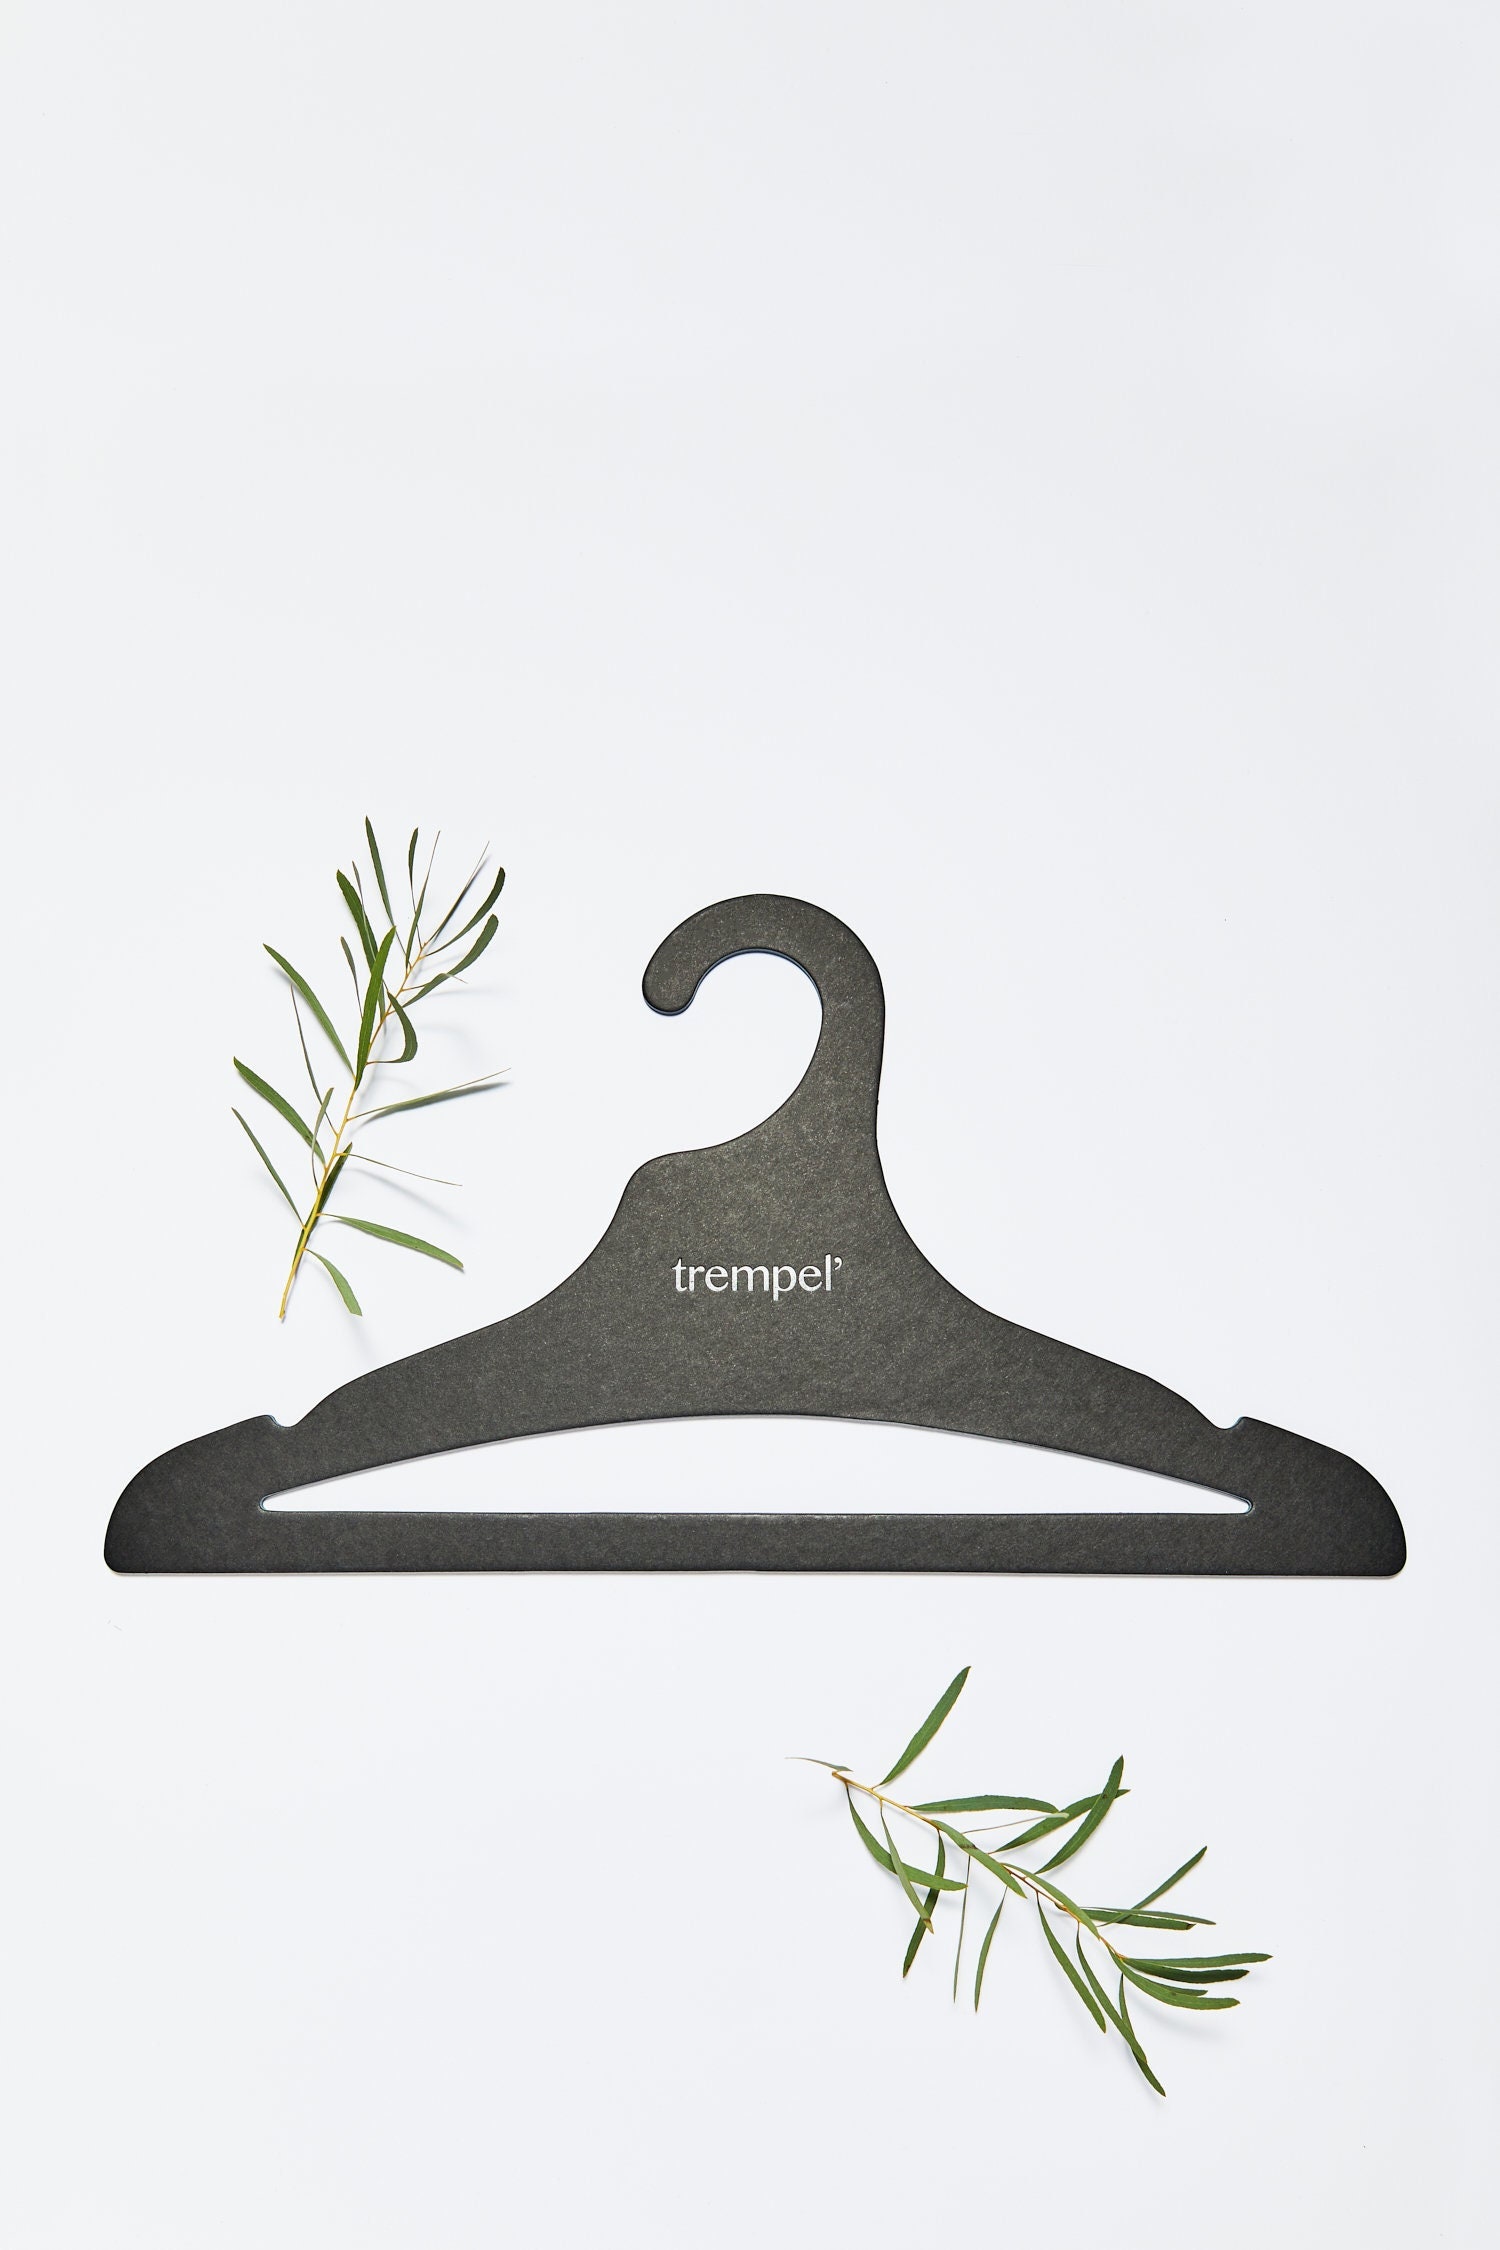 r e ) x Eco-Friendly Hangers - Sustainable Clothing Hangers, Kids